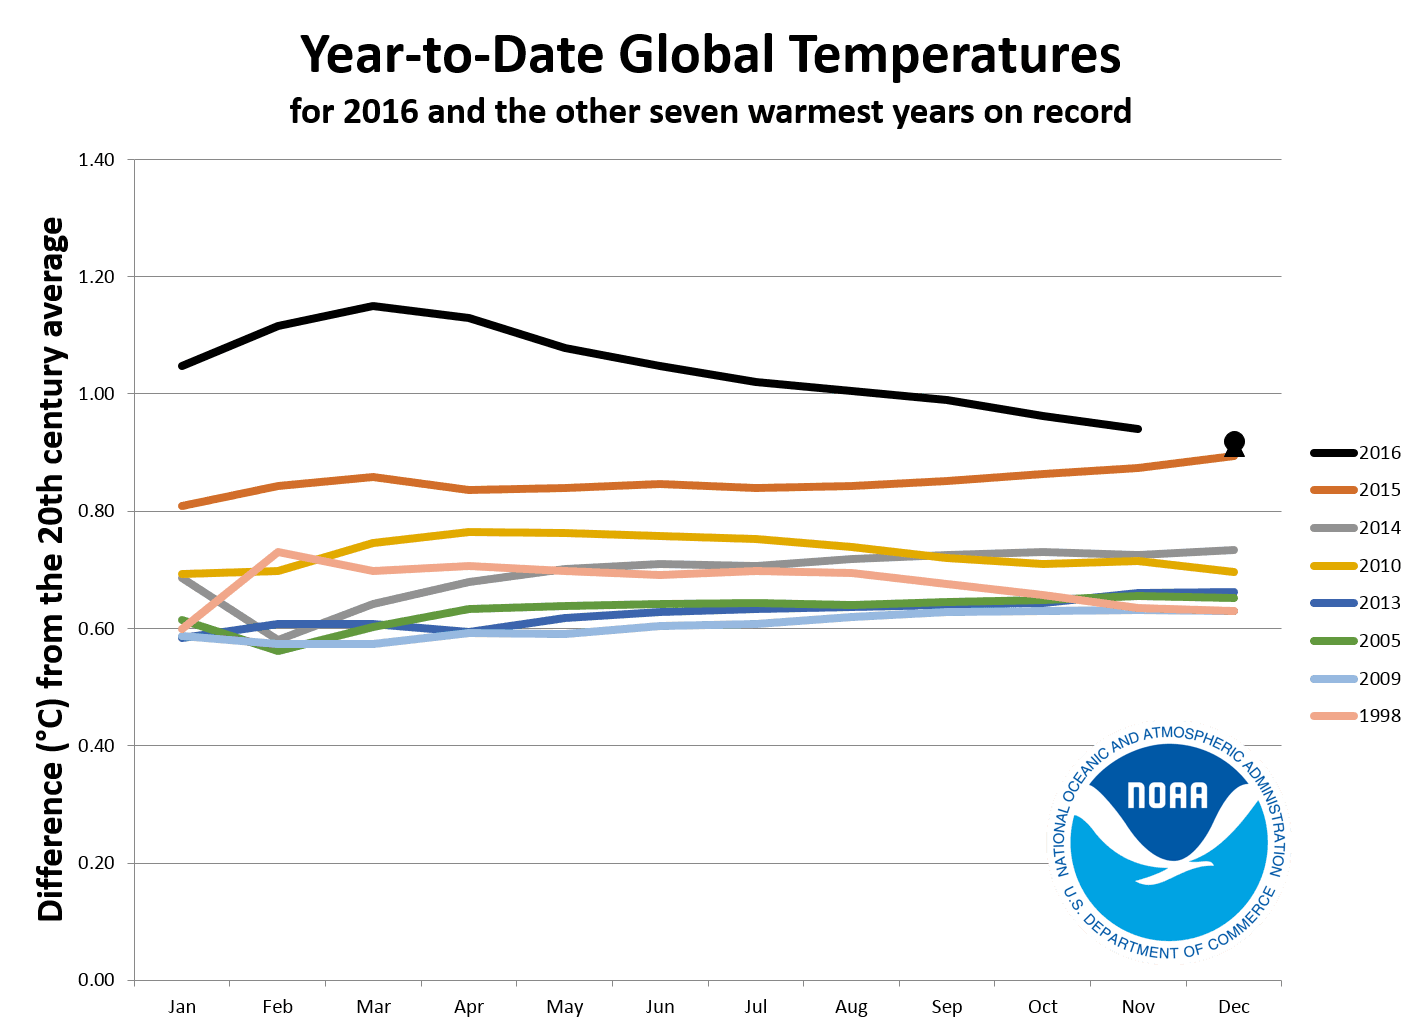 Data from the National Oceanic and Atmospheric Administration show 2016 on track to be the warmest year on record, likely beating out the previous warmest years, 2013, 2010, 2014 and 2015.